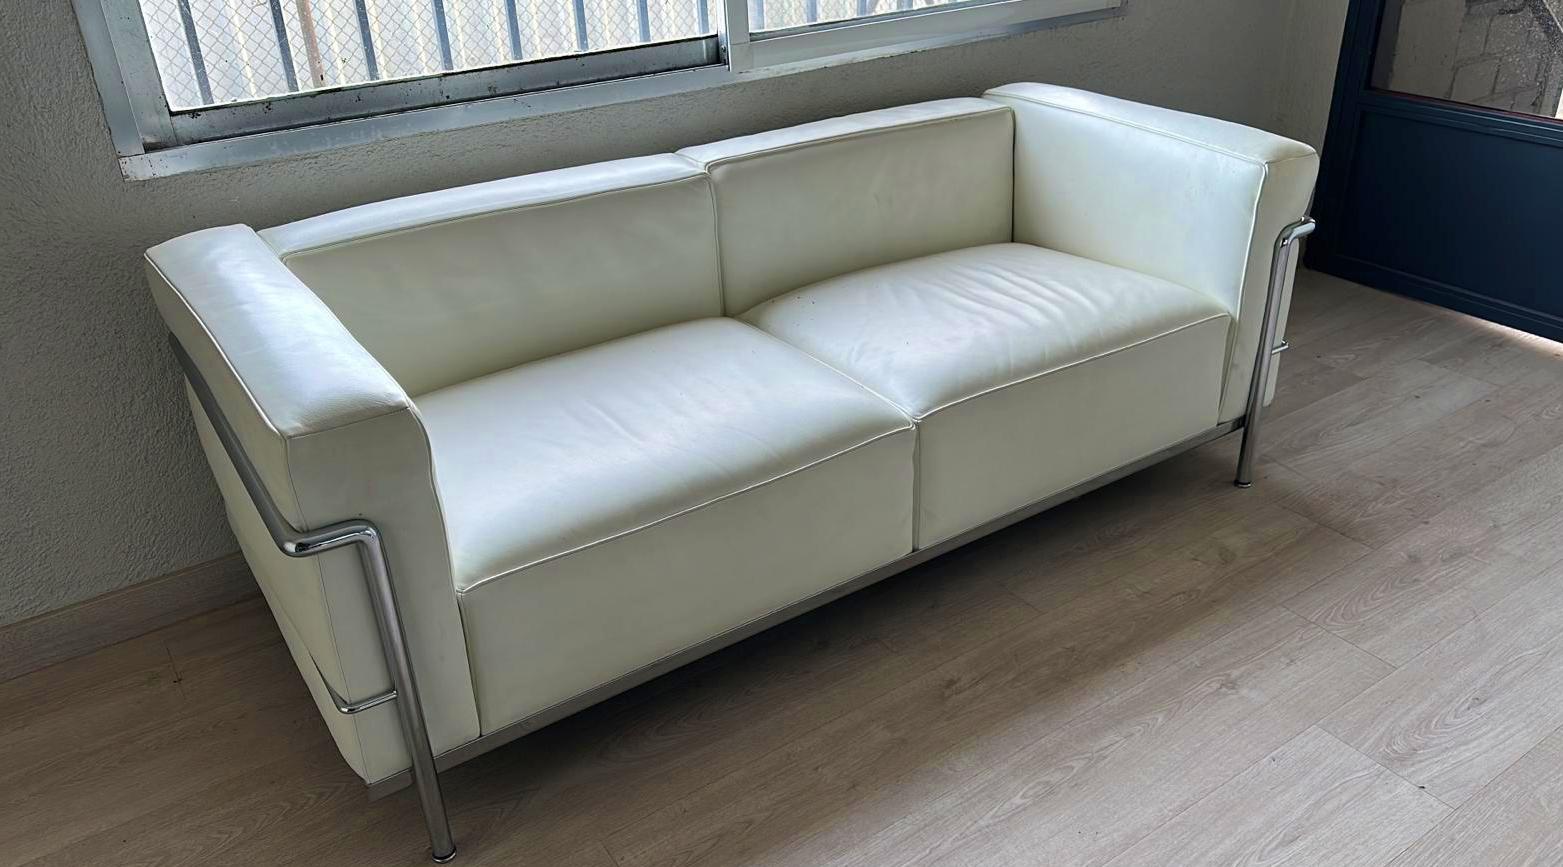 Le Corbusier Cassina original sofa
Cassina original LC2
White skin.
Perfect state.
Measures: 130cm x 50cm x 54cm

In 1922, Le Corbusier began working in the new rue de Sèvres, Paris, atelier with his cousin Pierre Jeanneret with whom he shared